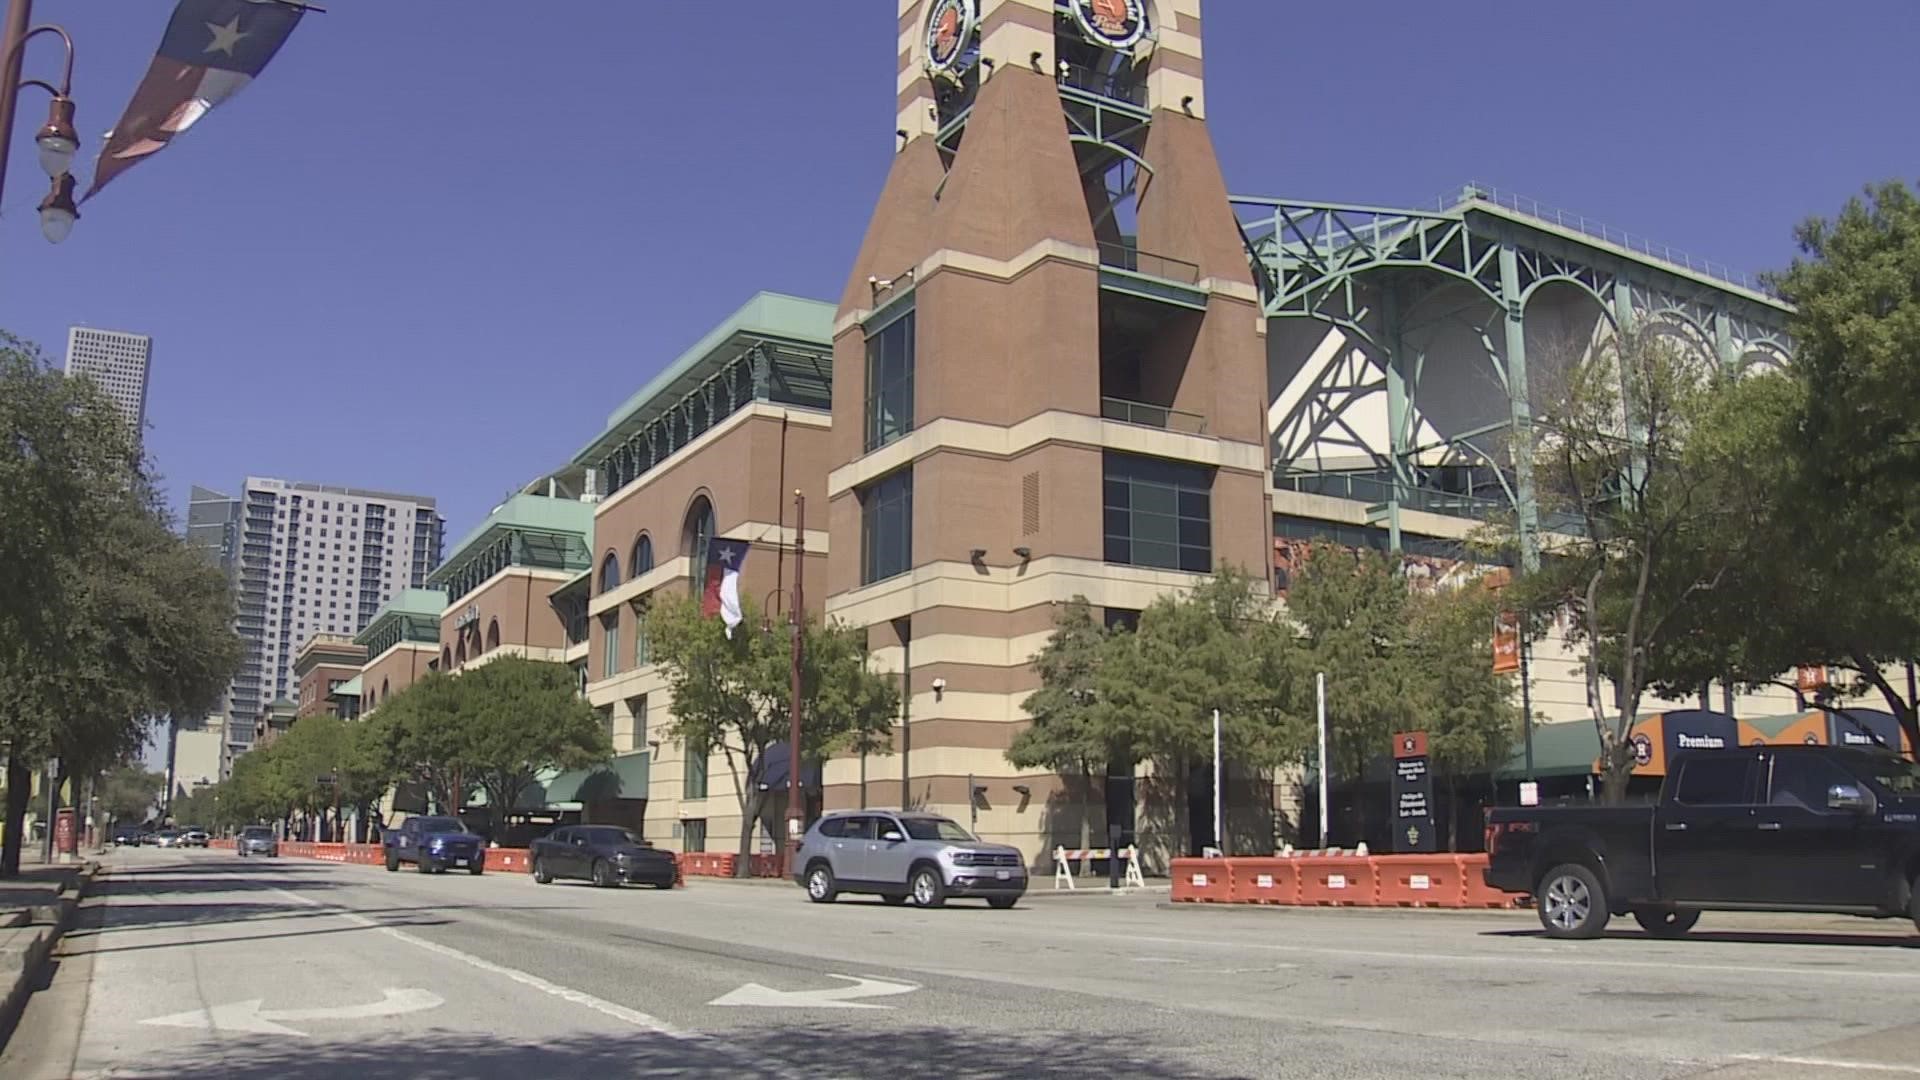 Security measure for World Series games in Houston khou